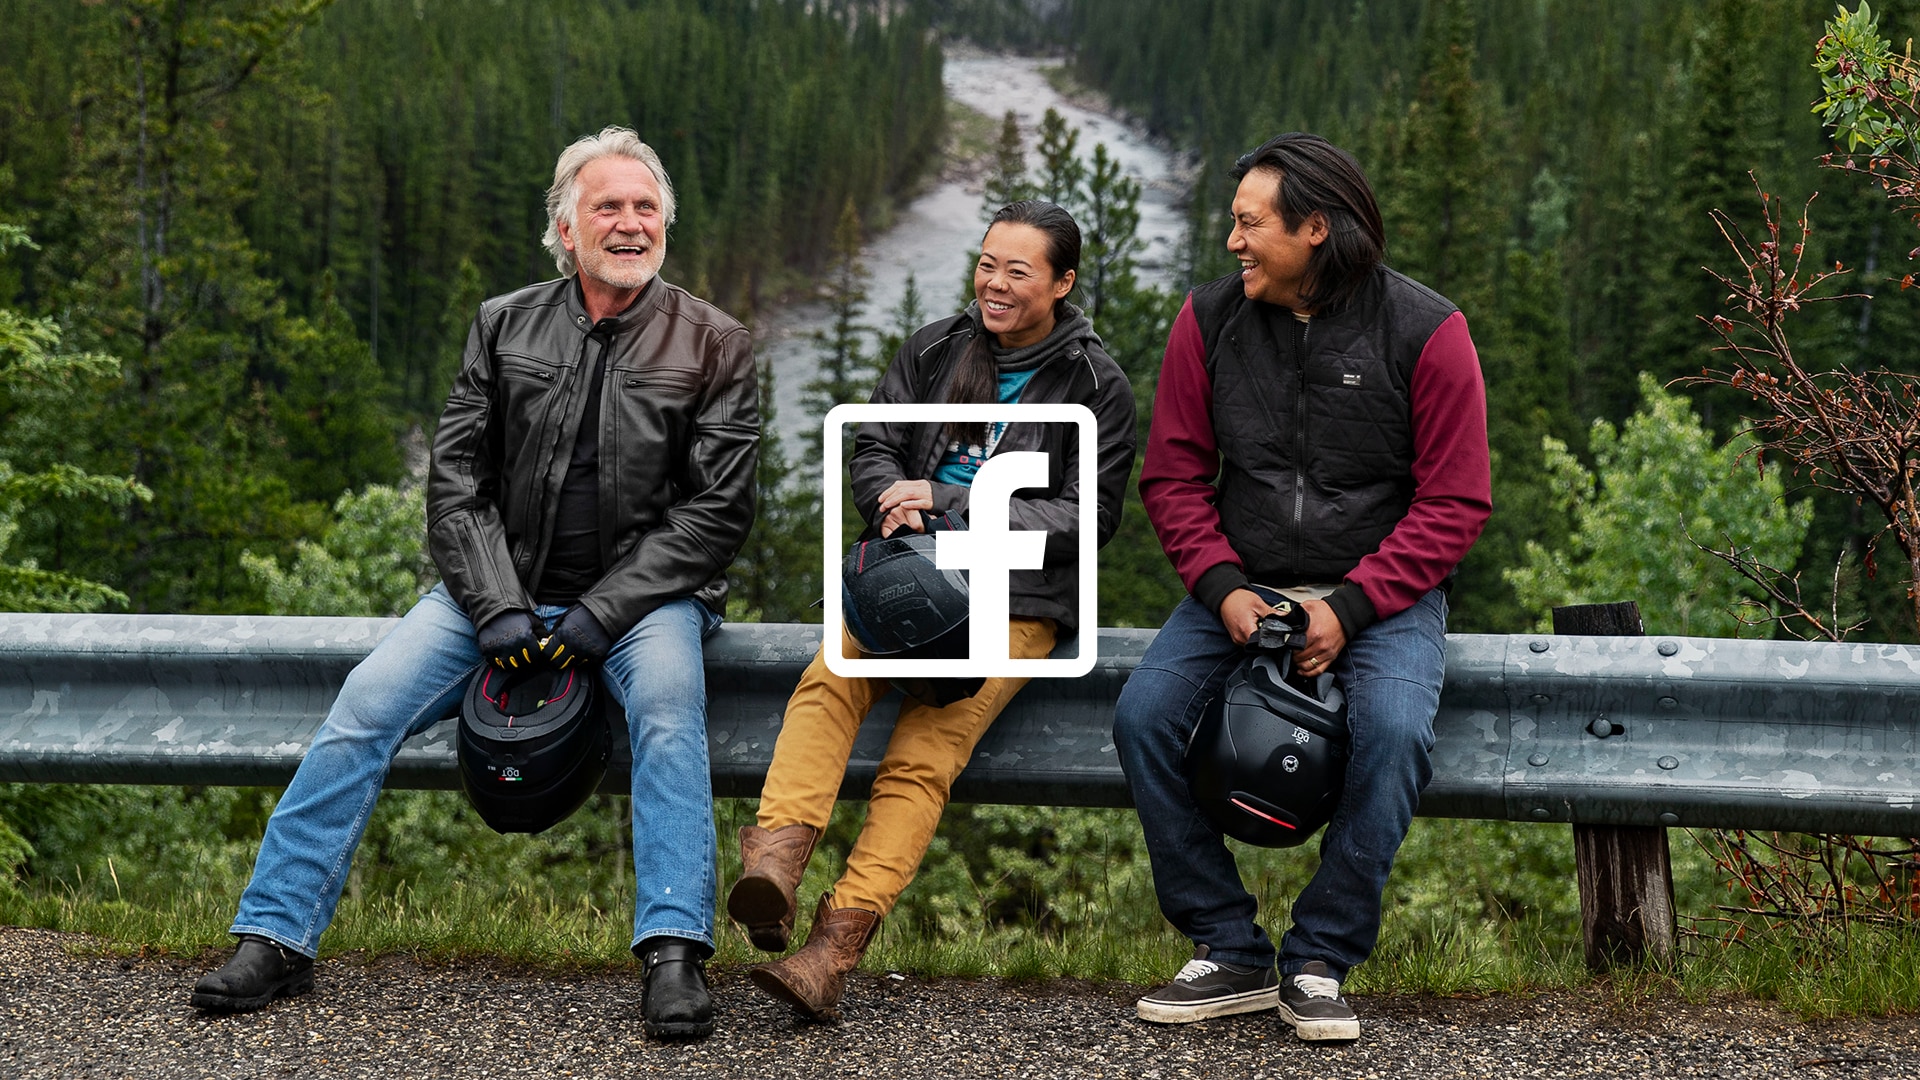 Three people laughing and talking with a Facebook logo over the image